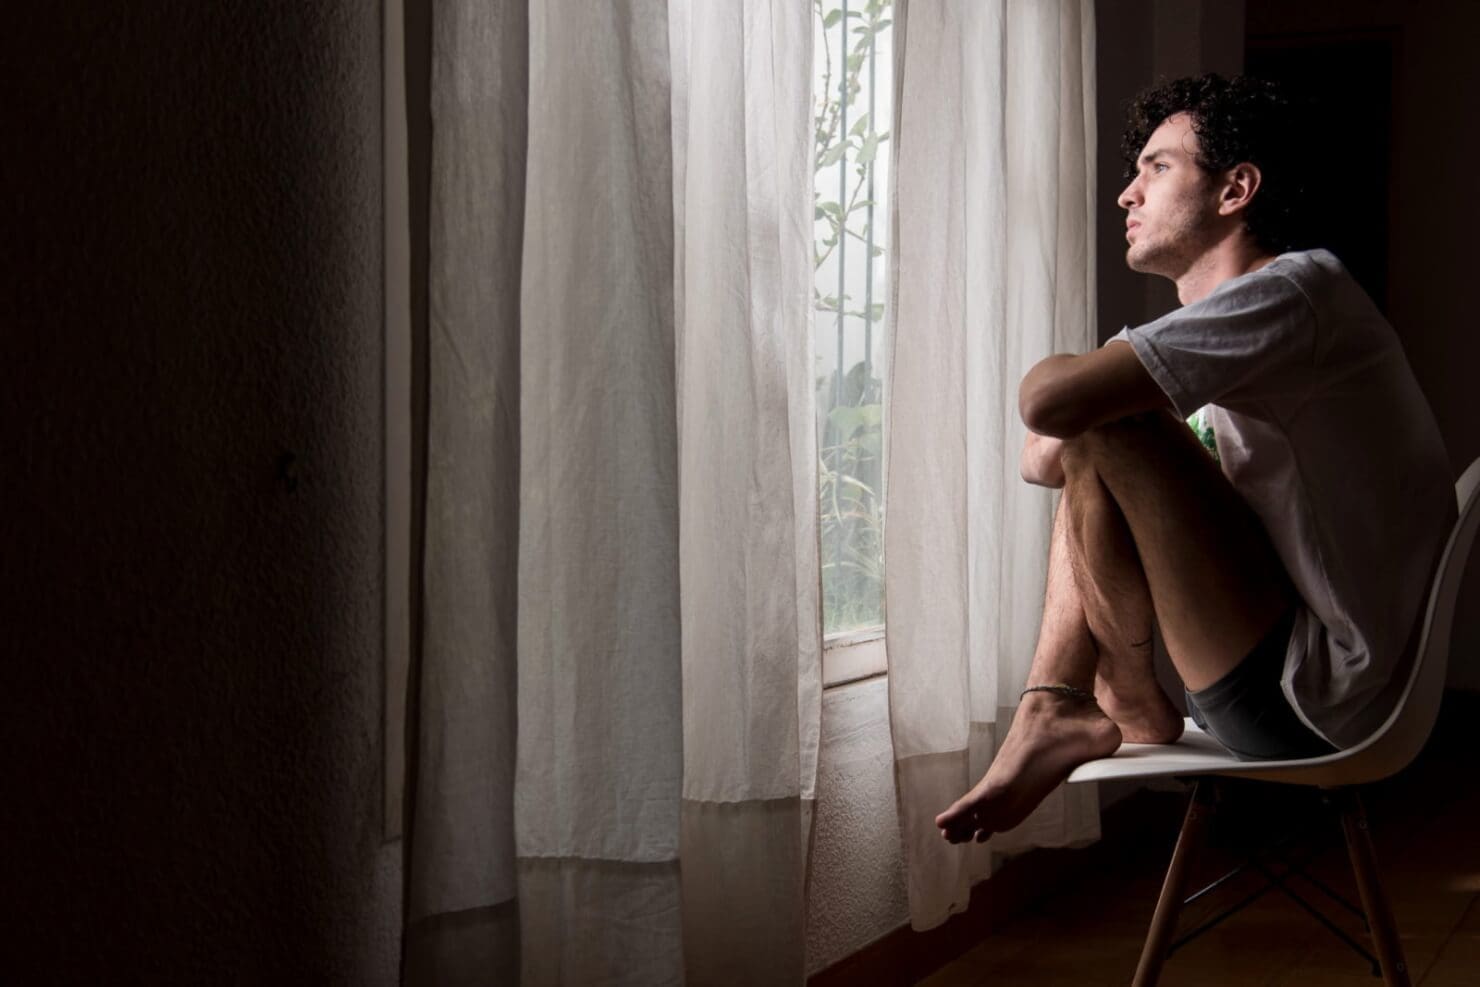 A young guy is sitting on a chair looking out his window.